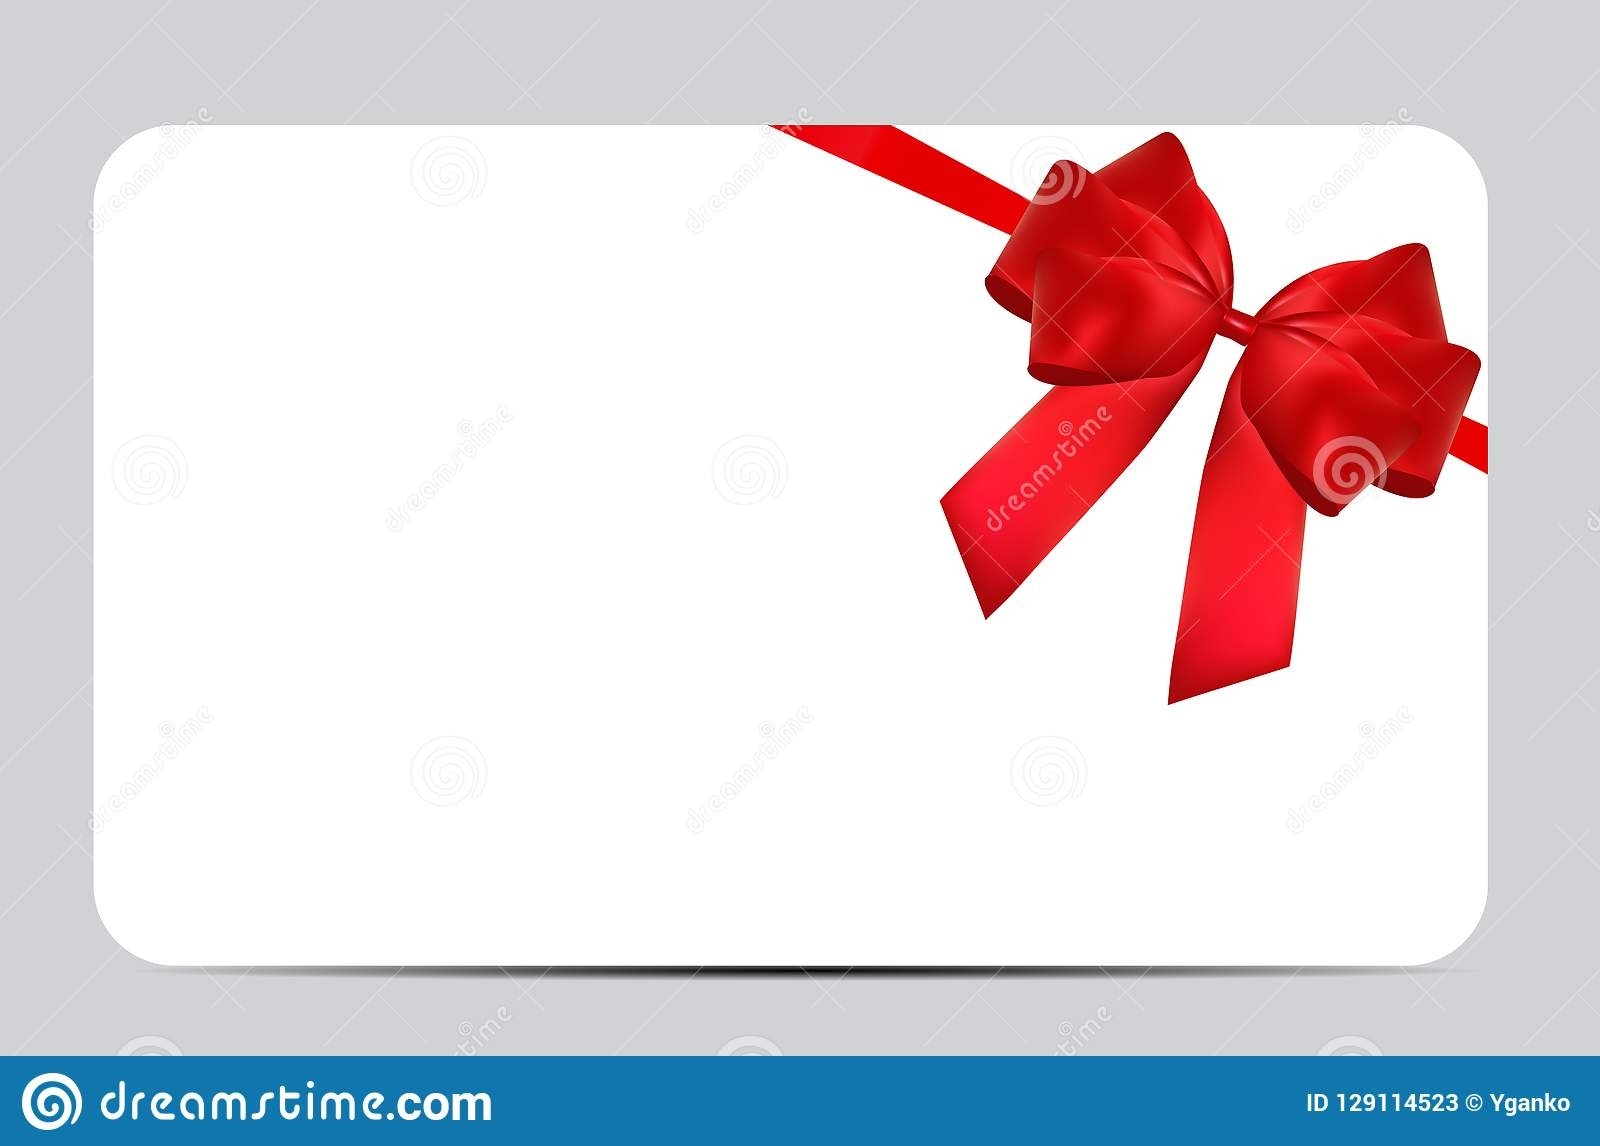 Blank Gift Card Template With Red Bow And Ribbon. Vector Illustration Regarding Present Card Template